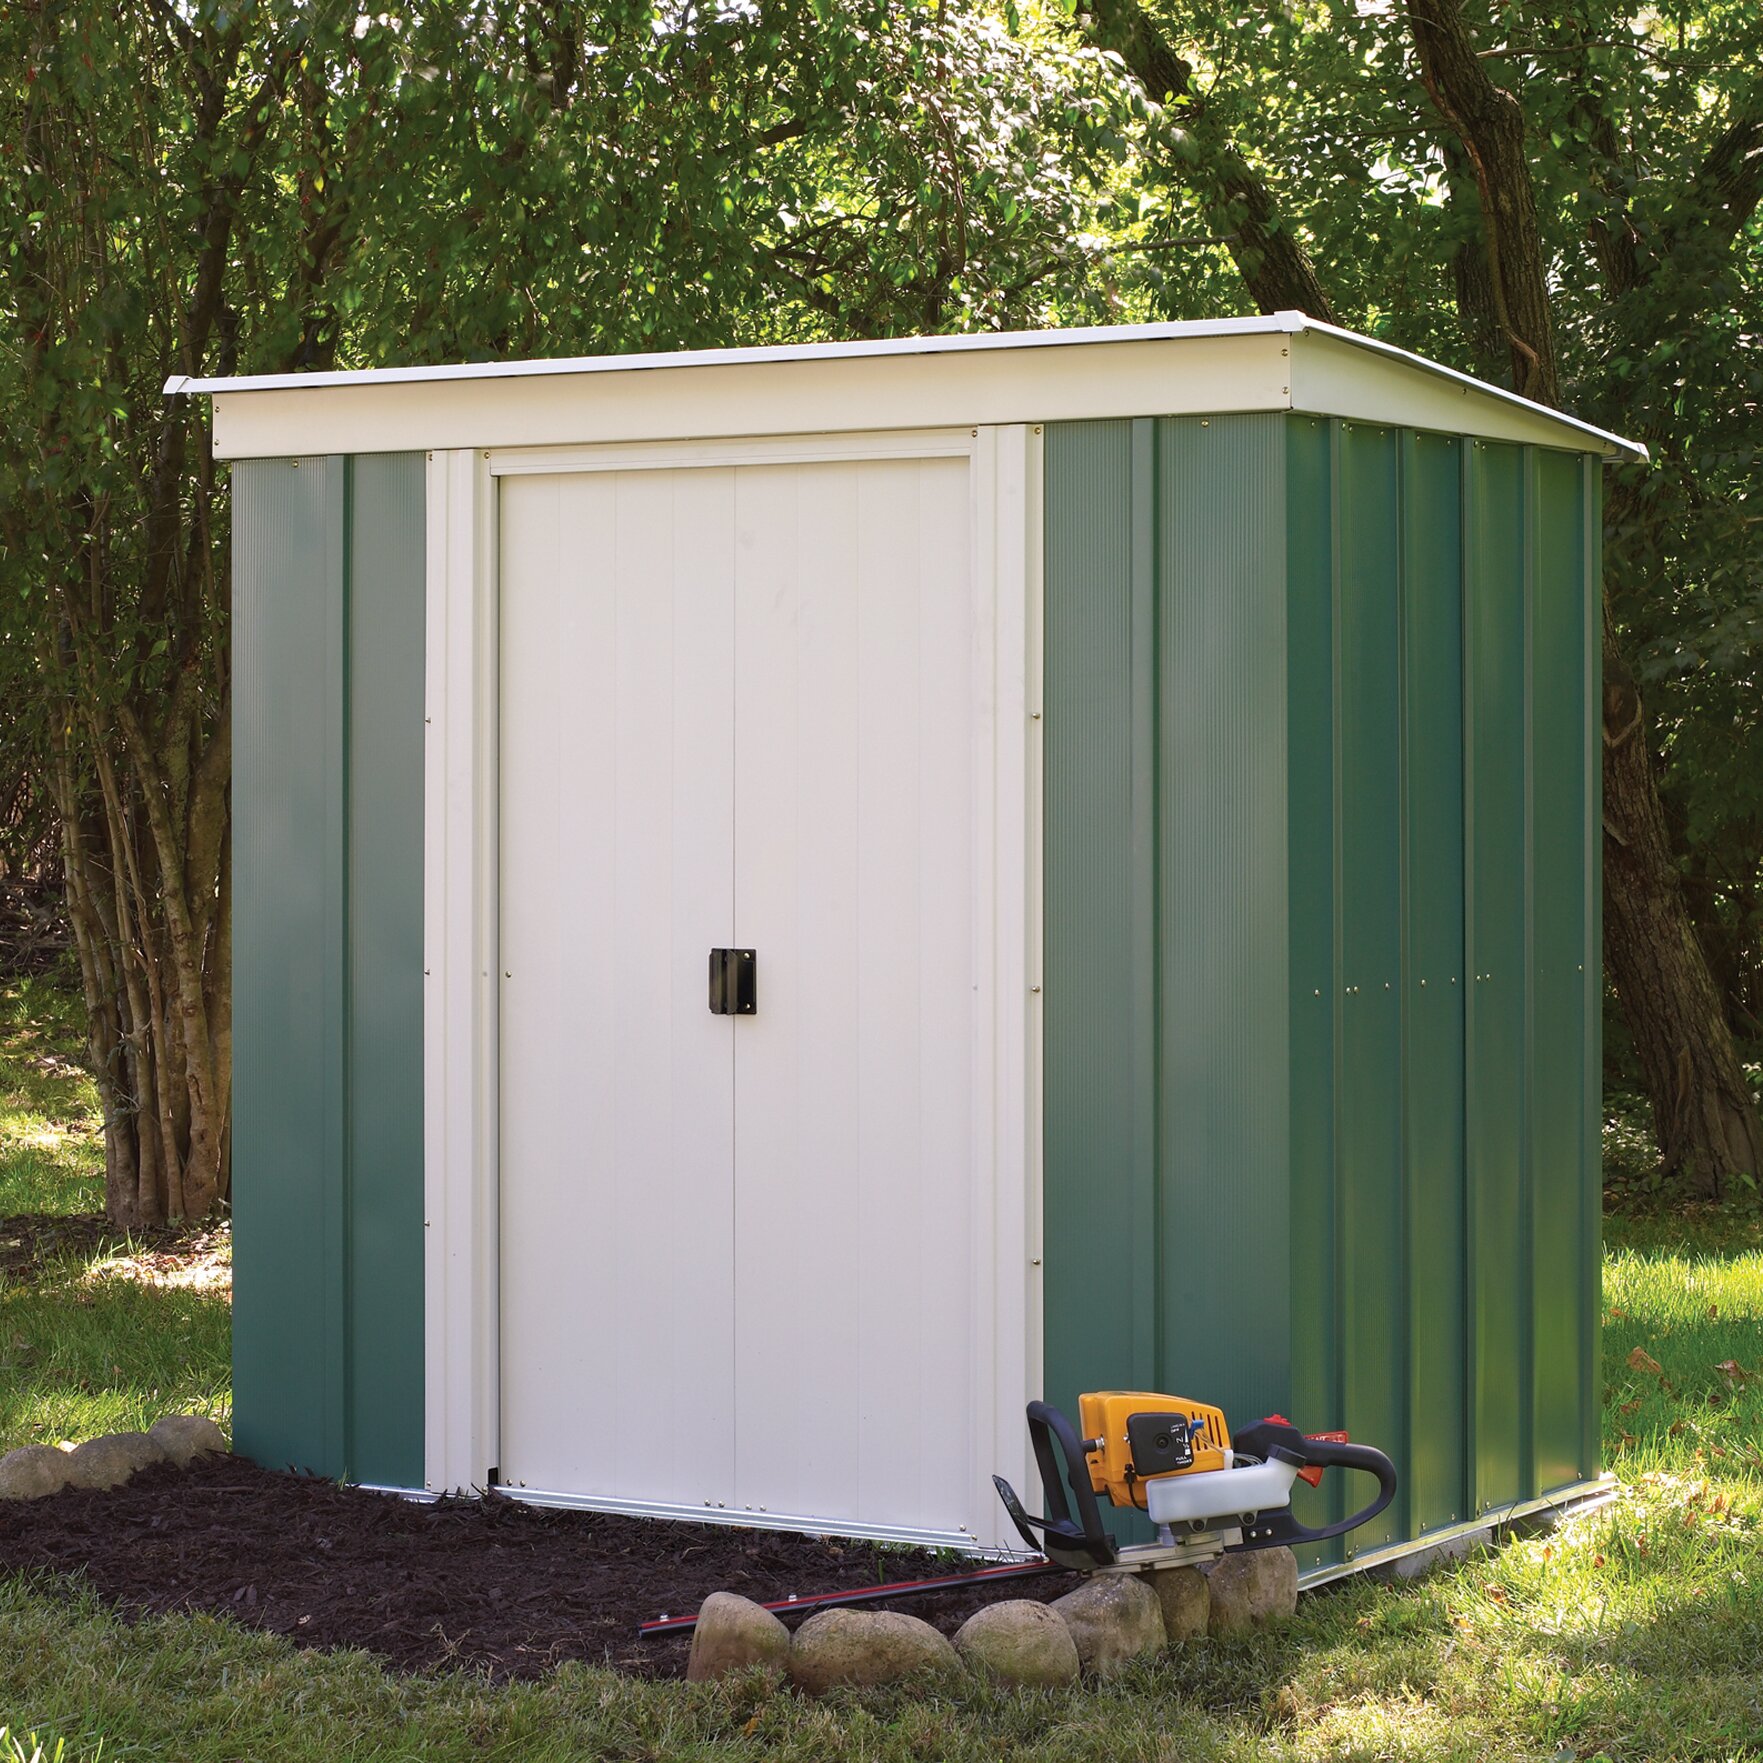 Rowlinson 8 Ft. x 4 Ft. Metal Lean-To Shed & Reviews | Wayfair UK